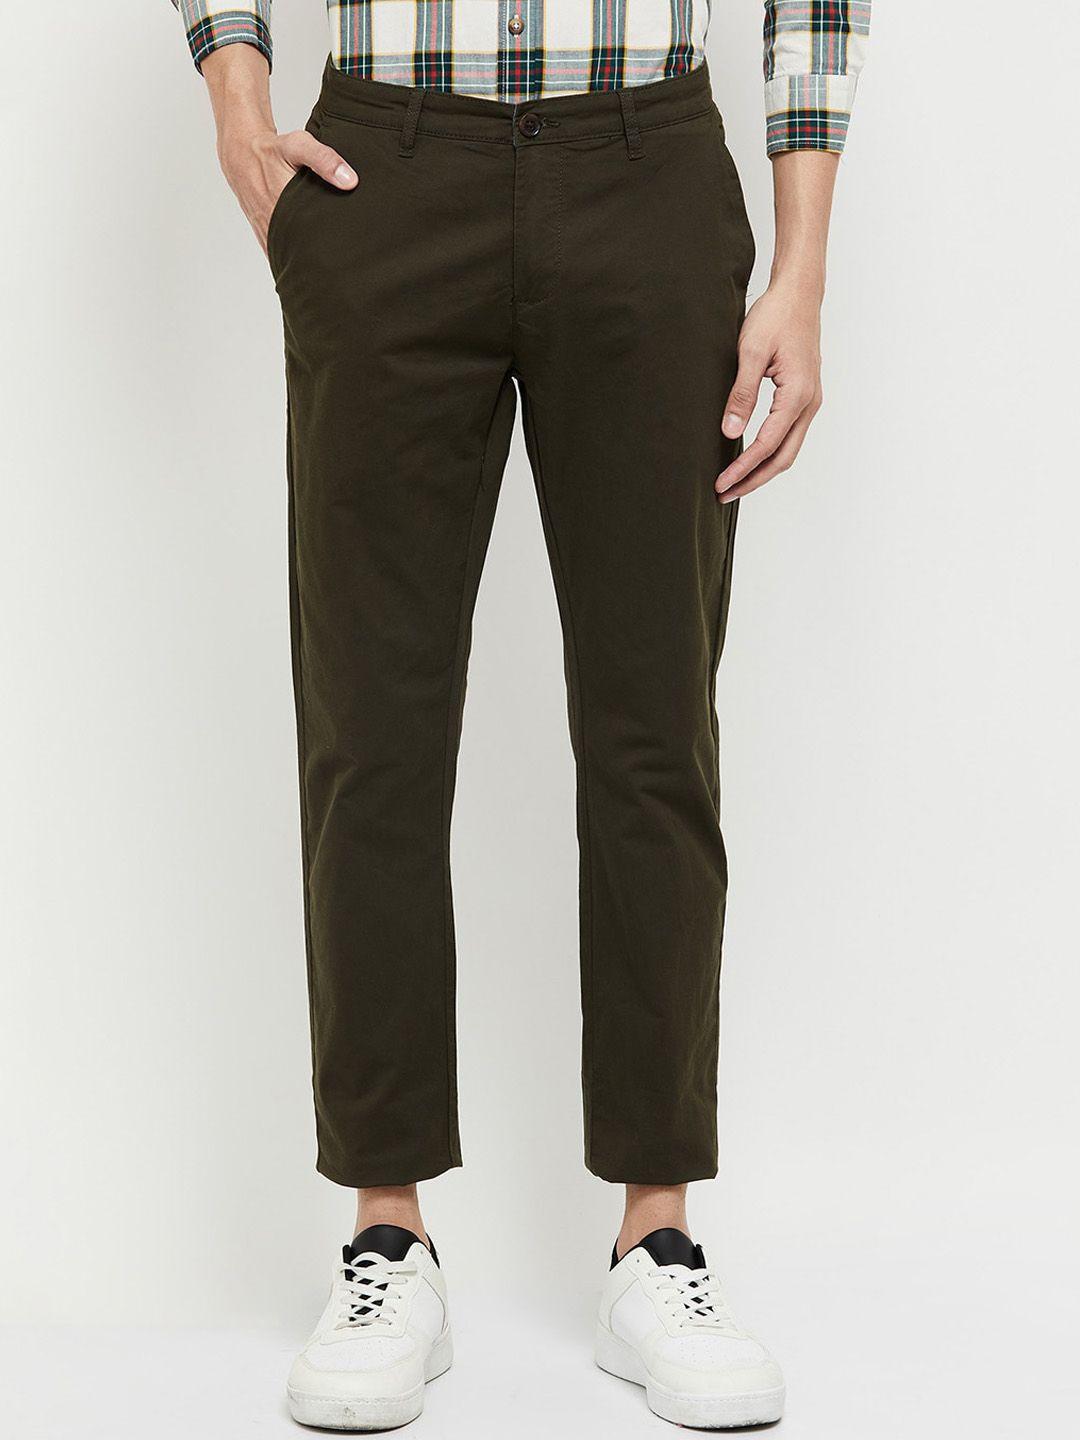 max Men Cotton Chinos Trousers